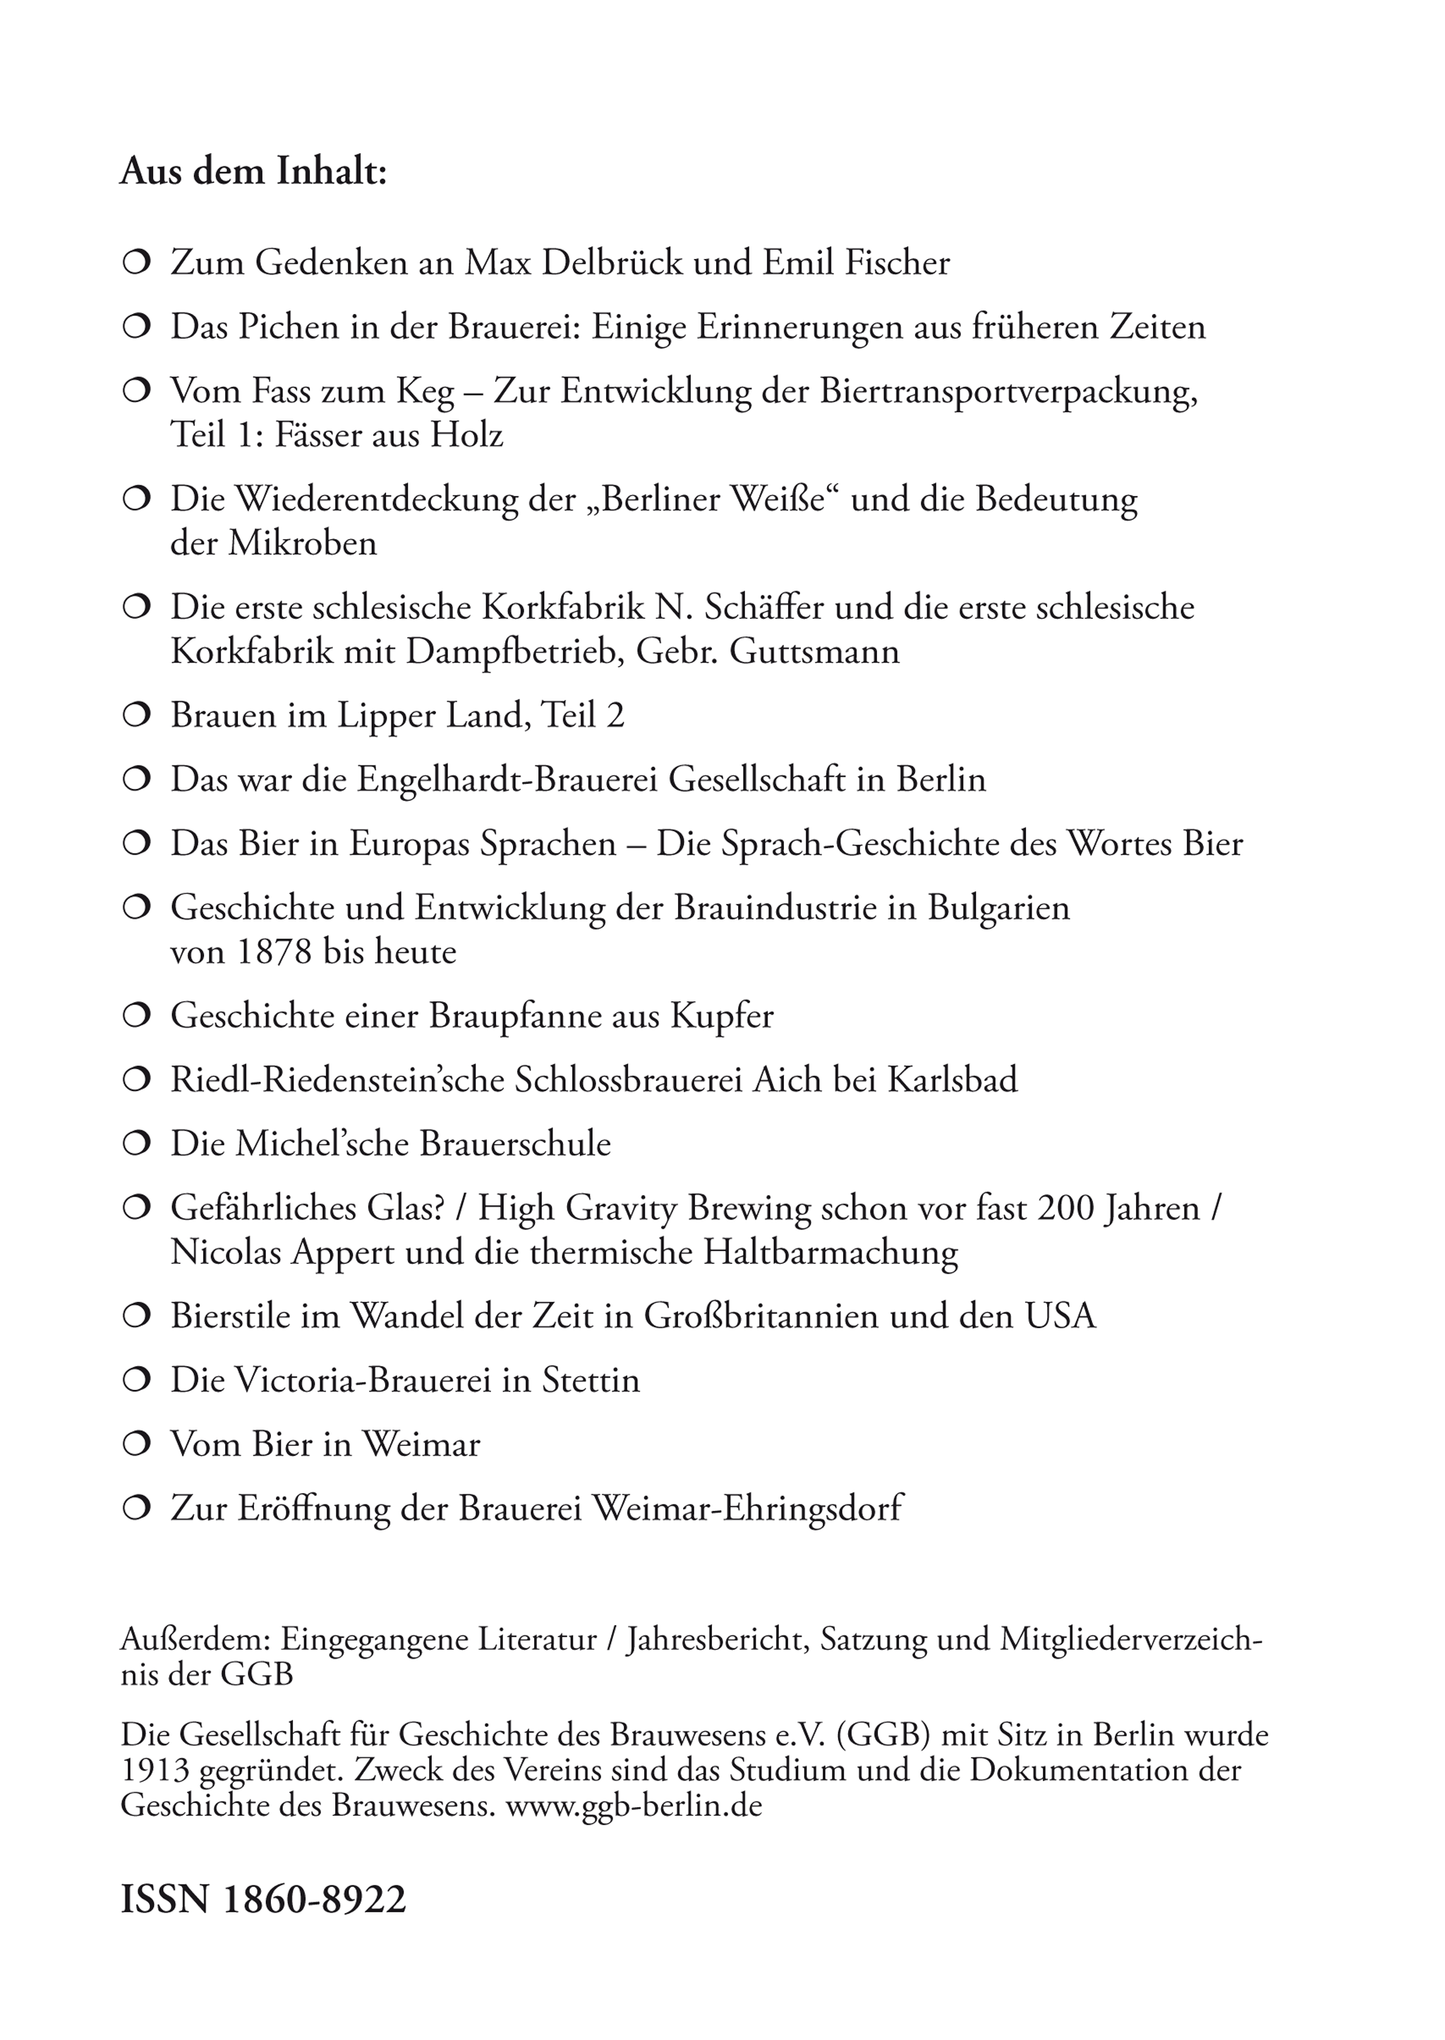 Yearbook 2019 of the Society for the History of Brewing e.V. (GGB)